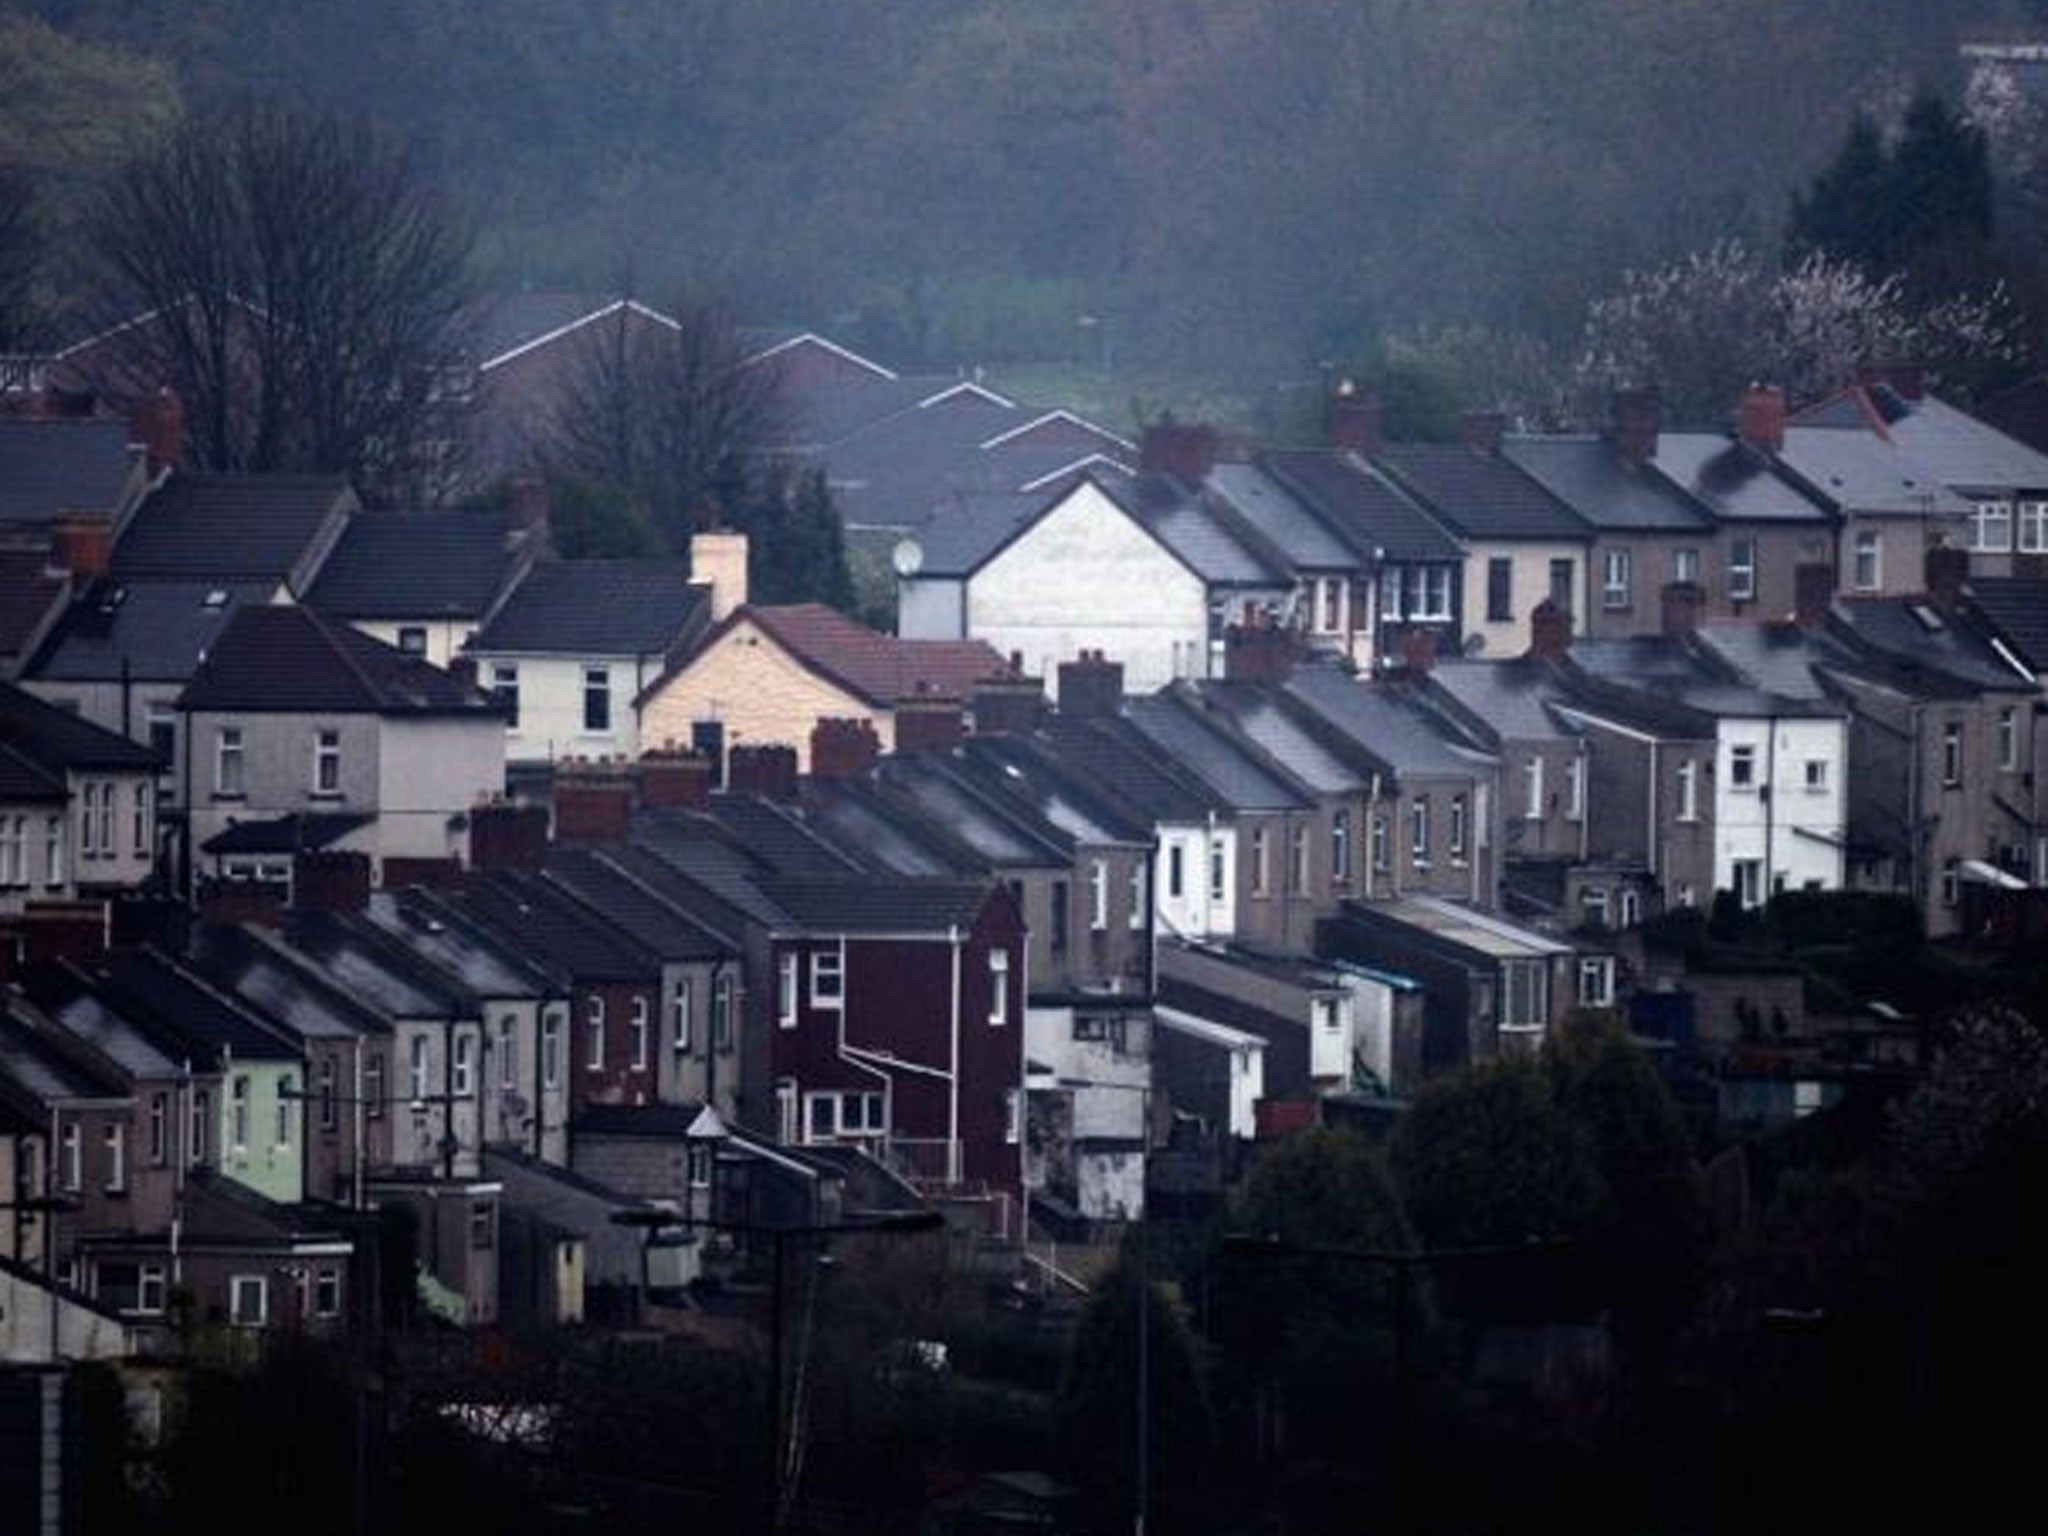 A general view of houses in residential streets in Newport, Wales